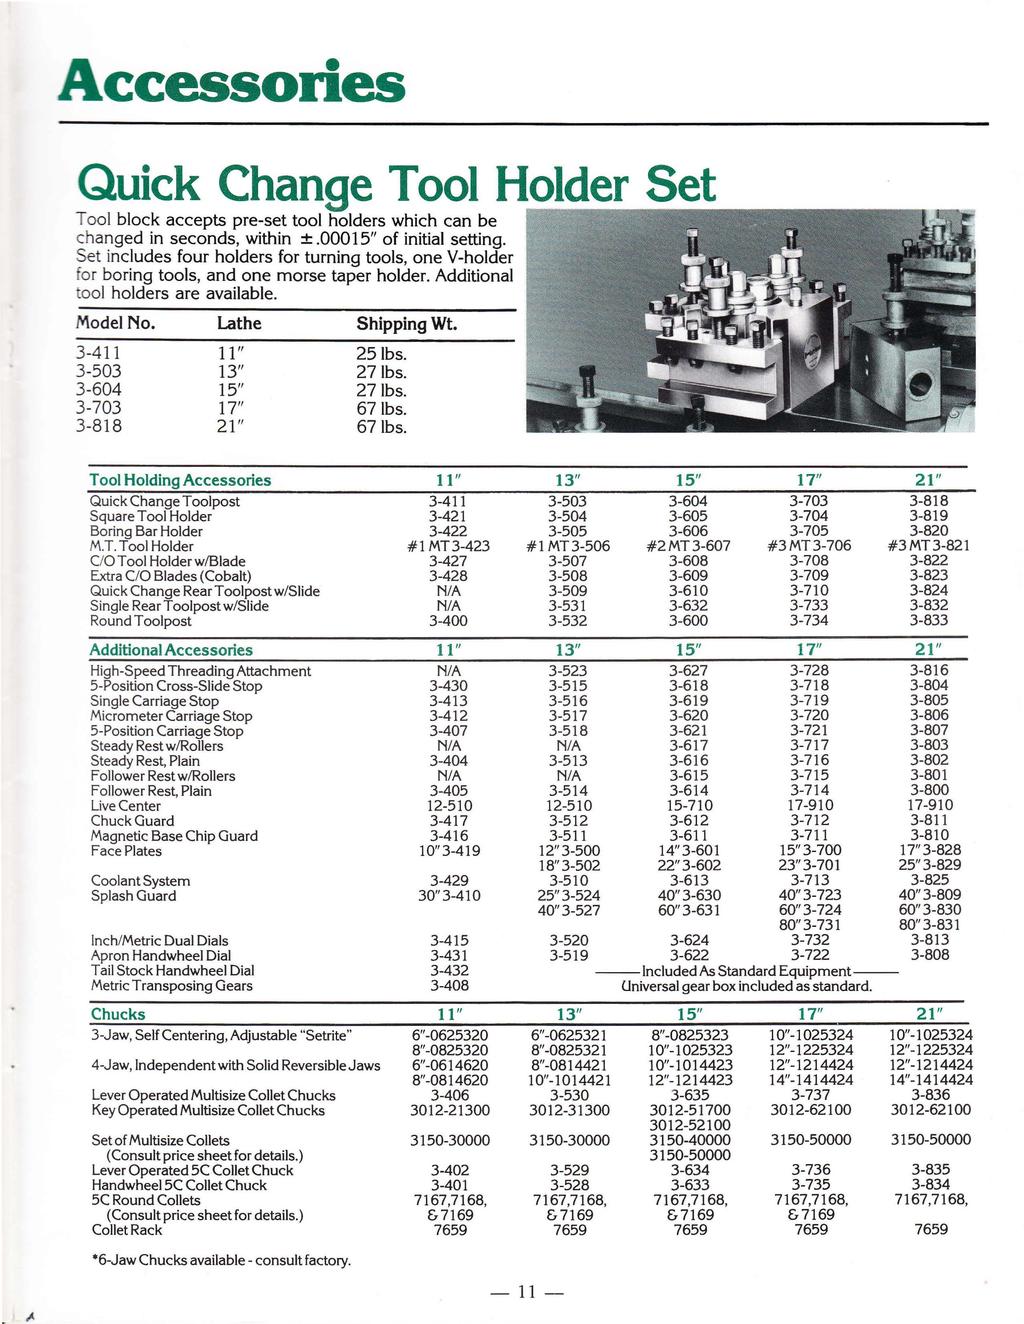 ccessones Quick Change Tool Holder Set Tool block accepts pre-set tool holders which can be changed in seconds, within ±.00015 of initial setting.